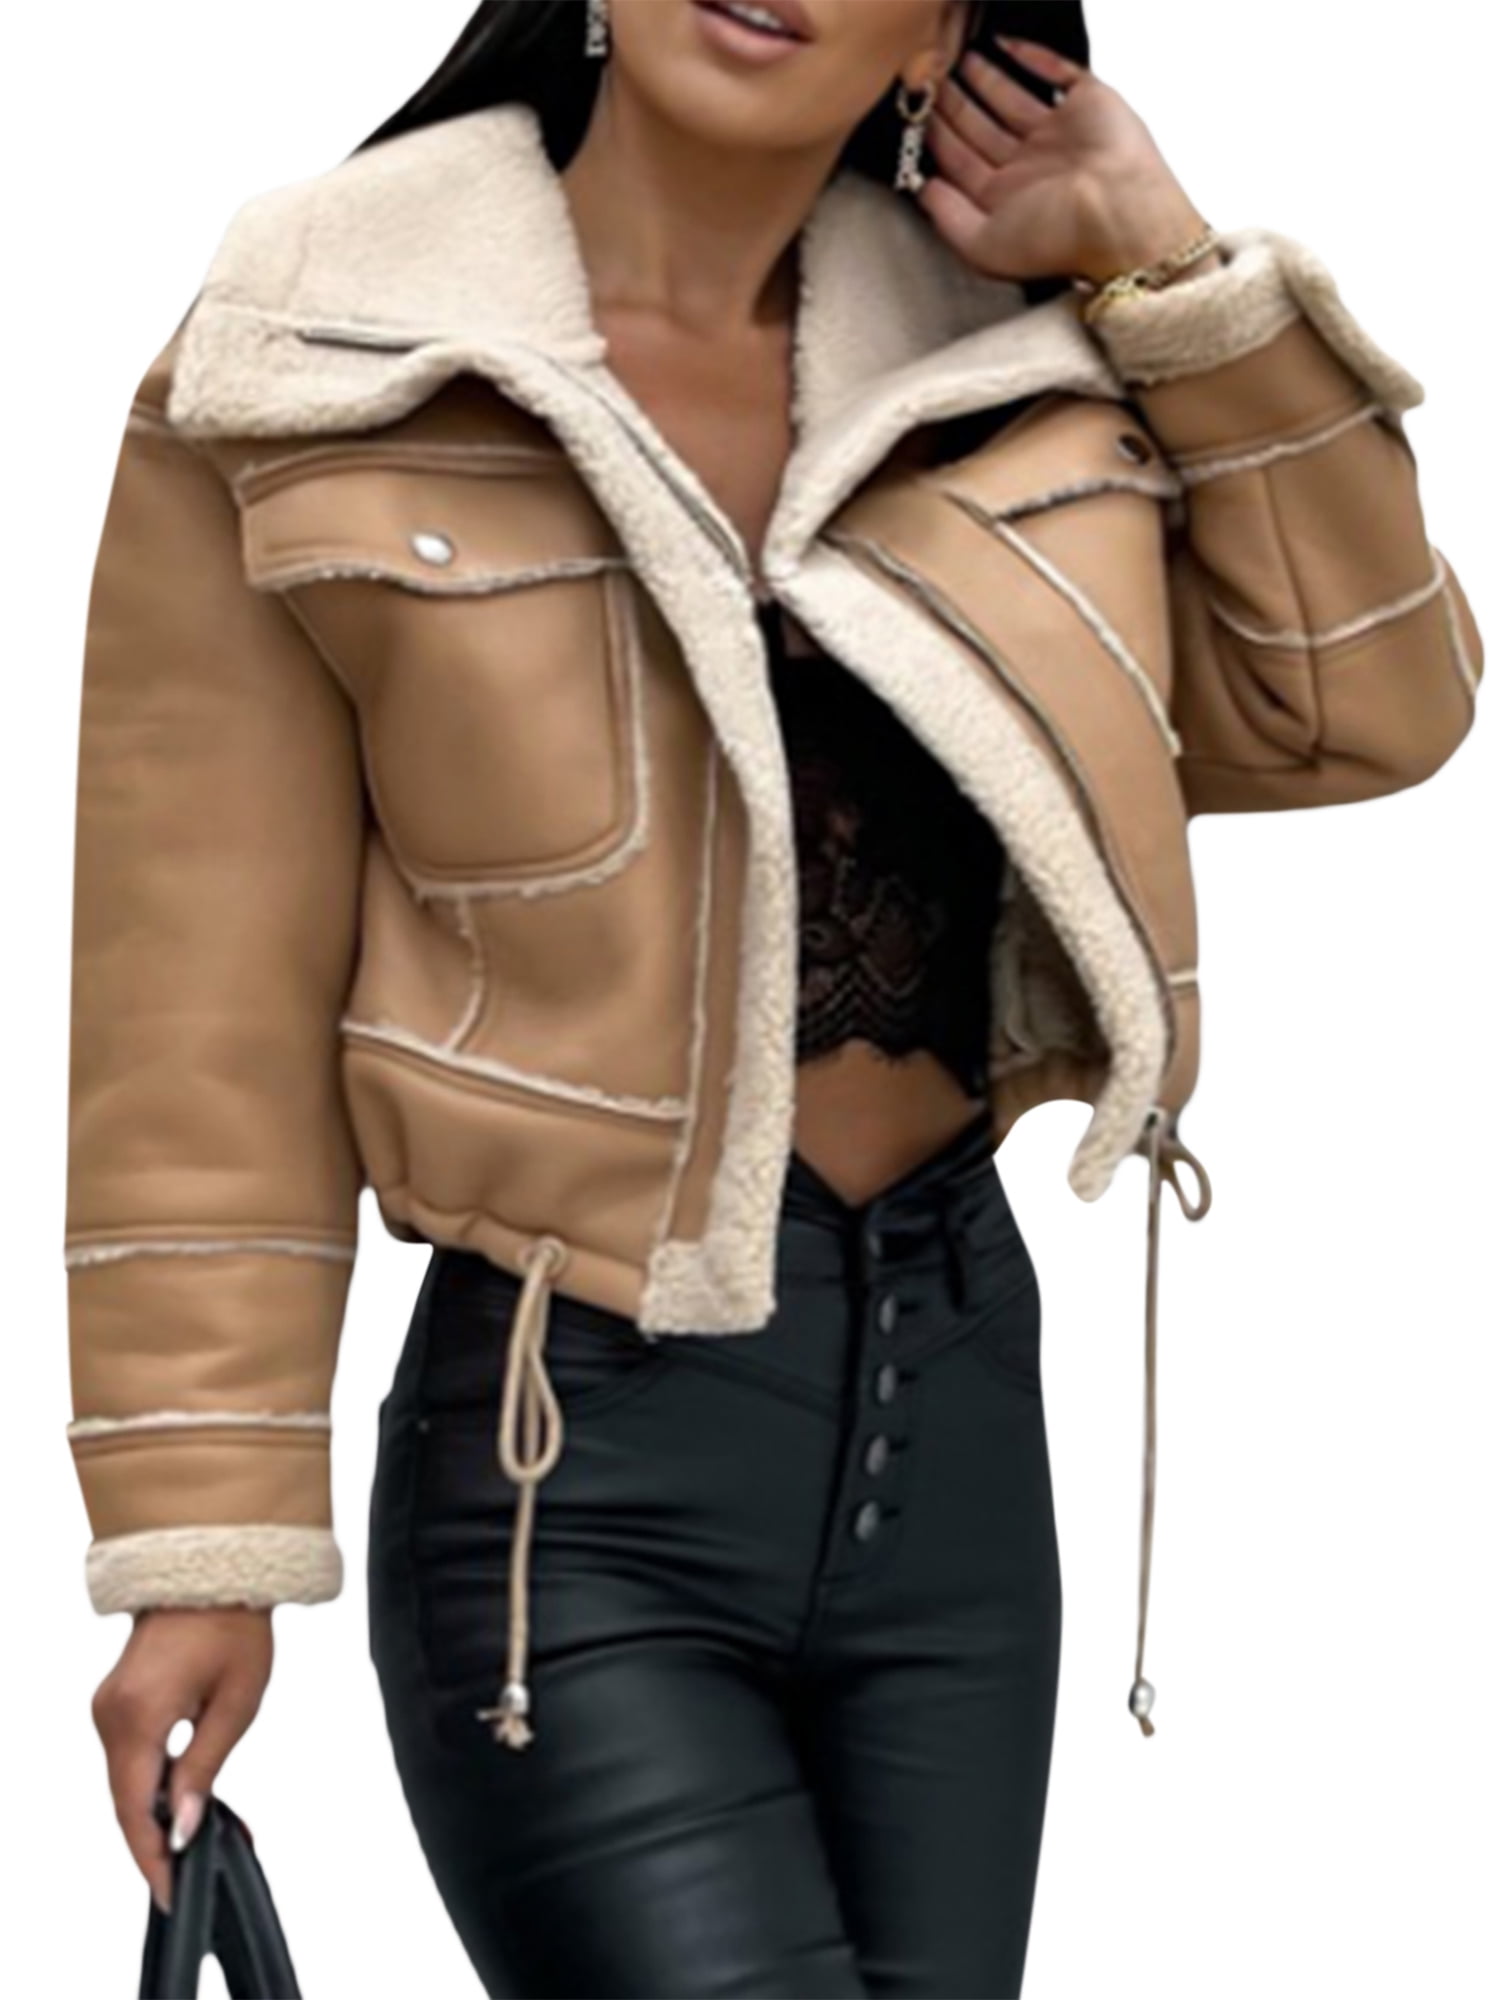 Women's Sherpa Faux Leather Trucker Jacket Cropped Suede Leather Motorcycle  Bomber Jacket